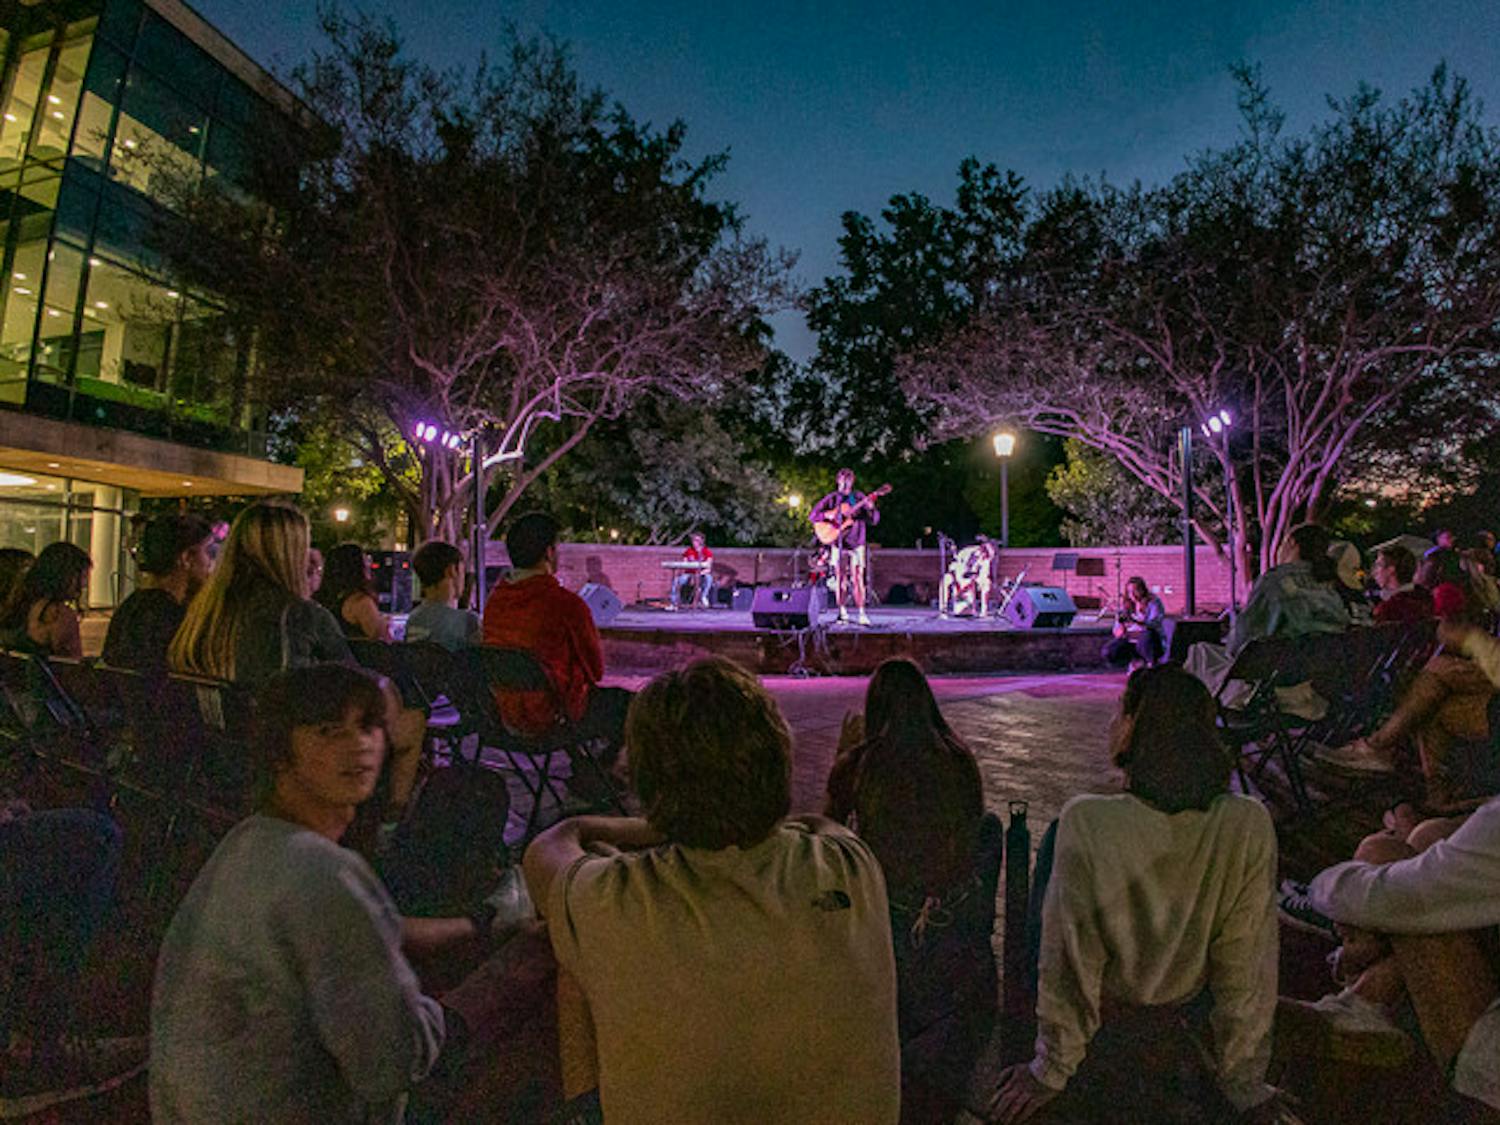 Fans watch as Henry and the Sleepers performs its set at the UofSC Battle of the Bands on Oct. 5, 2022. Students in attendance were an exposed to range of musical performances on the Russel House Patio as a variety of artists competed for the most fan votes.